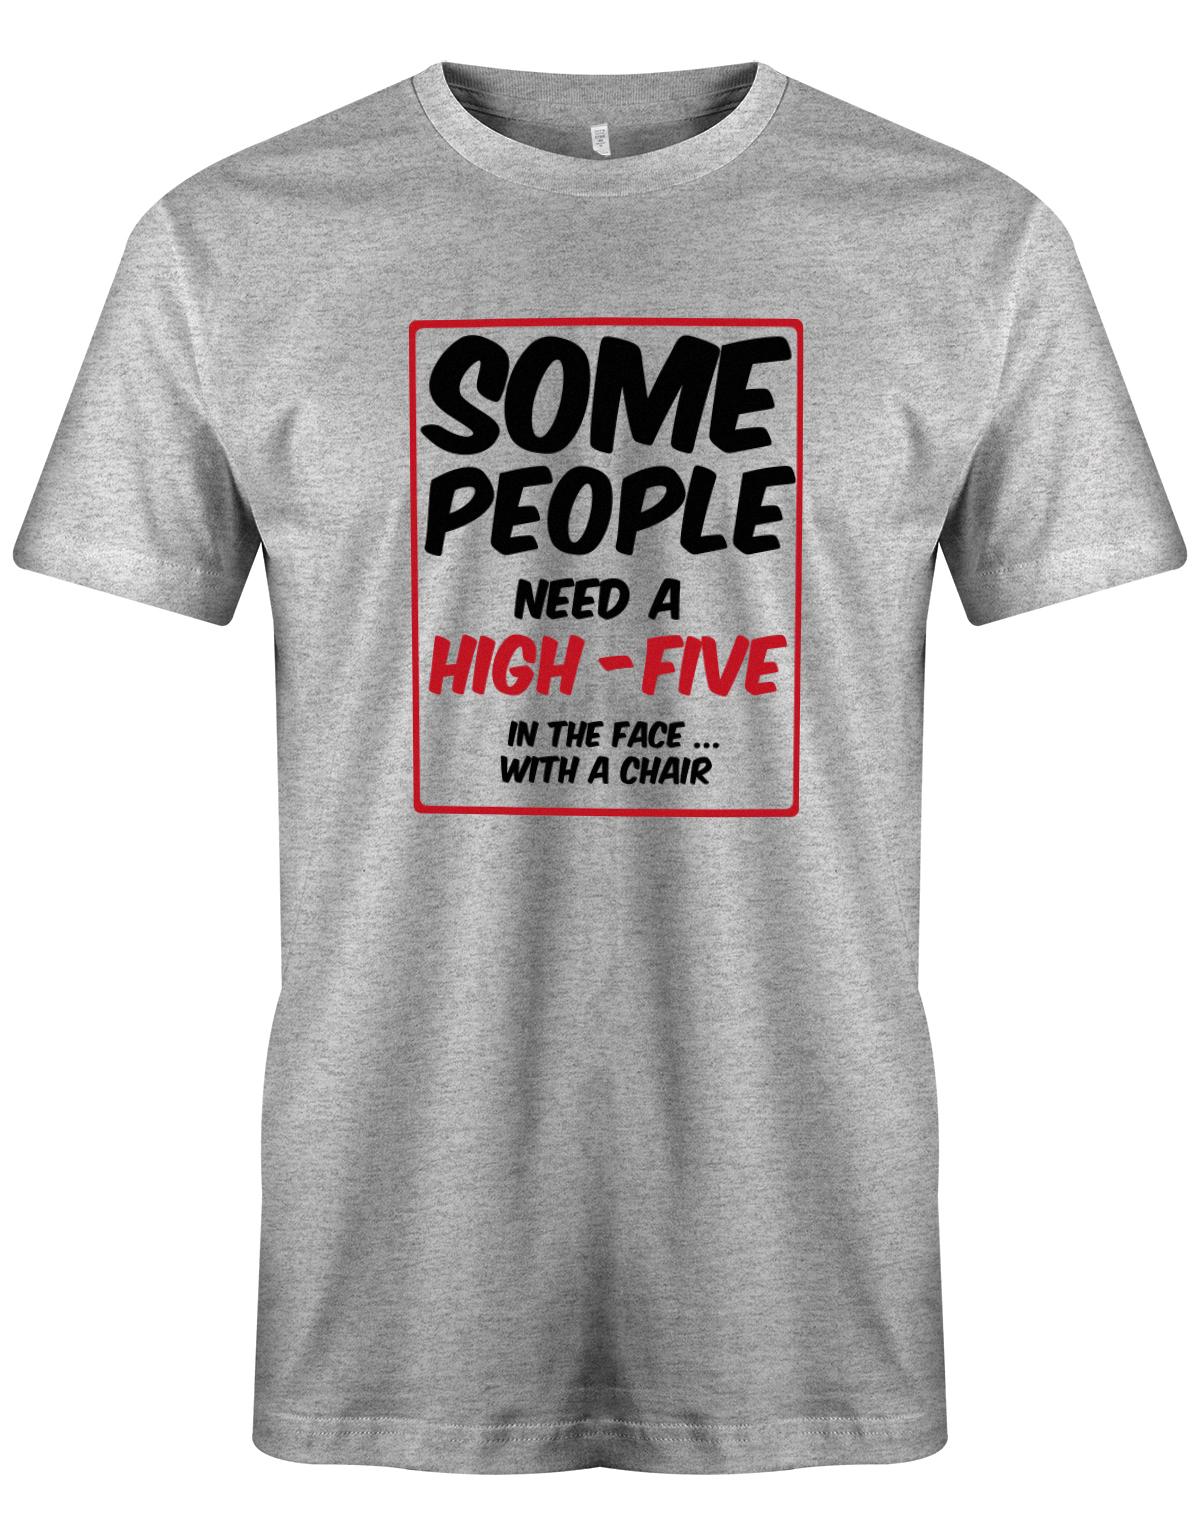 Some-People-need-a-High-Five-In-the-Face-with-a-Chair-Herren-Shirt-Grau